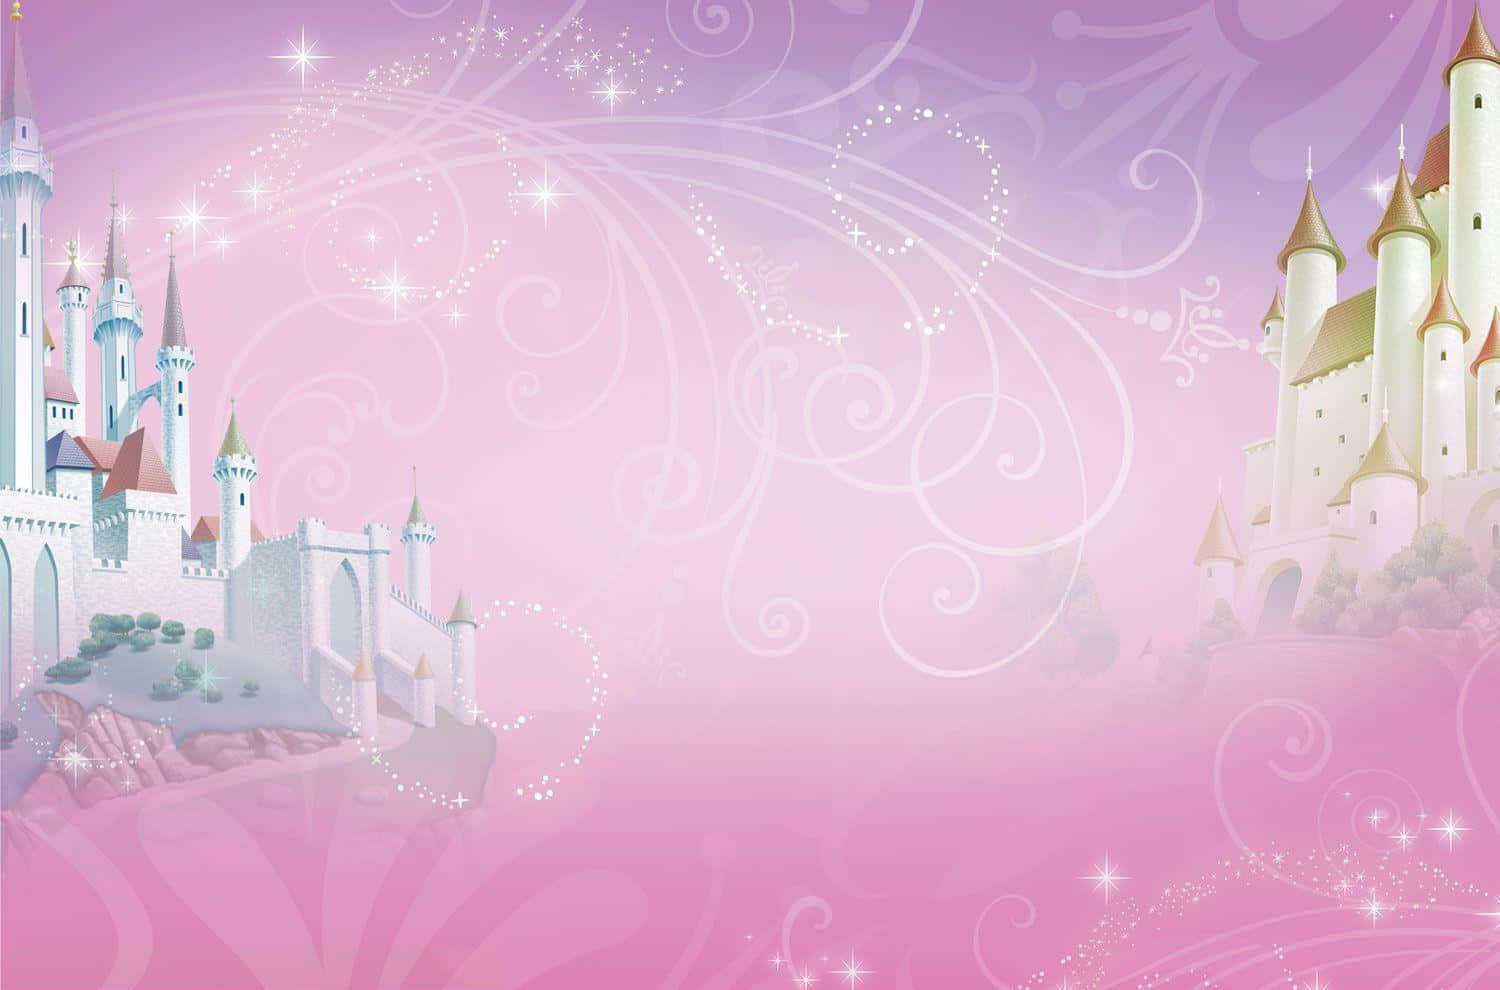 Become your own princess in this beautiful fairytale background